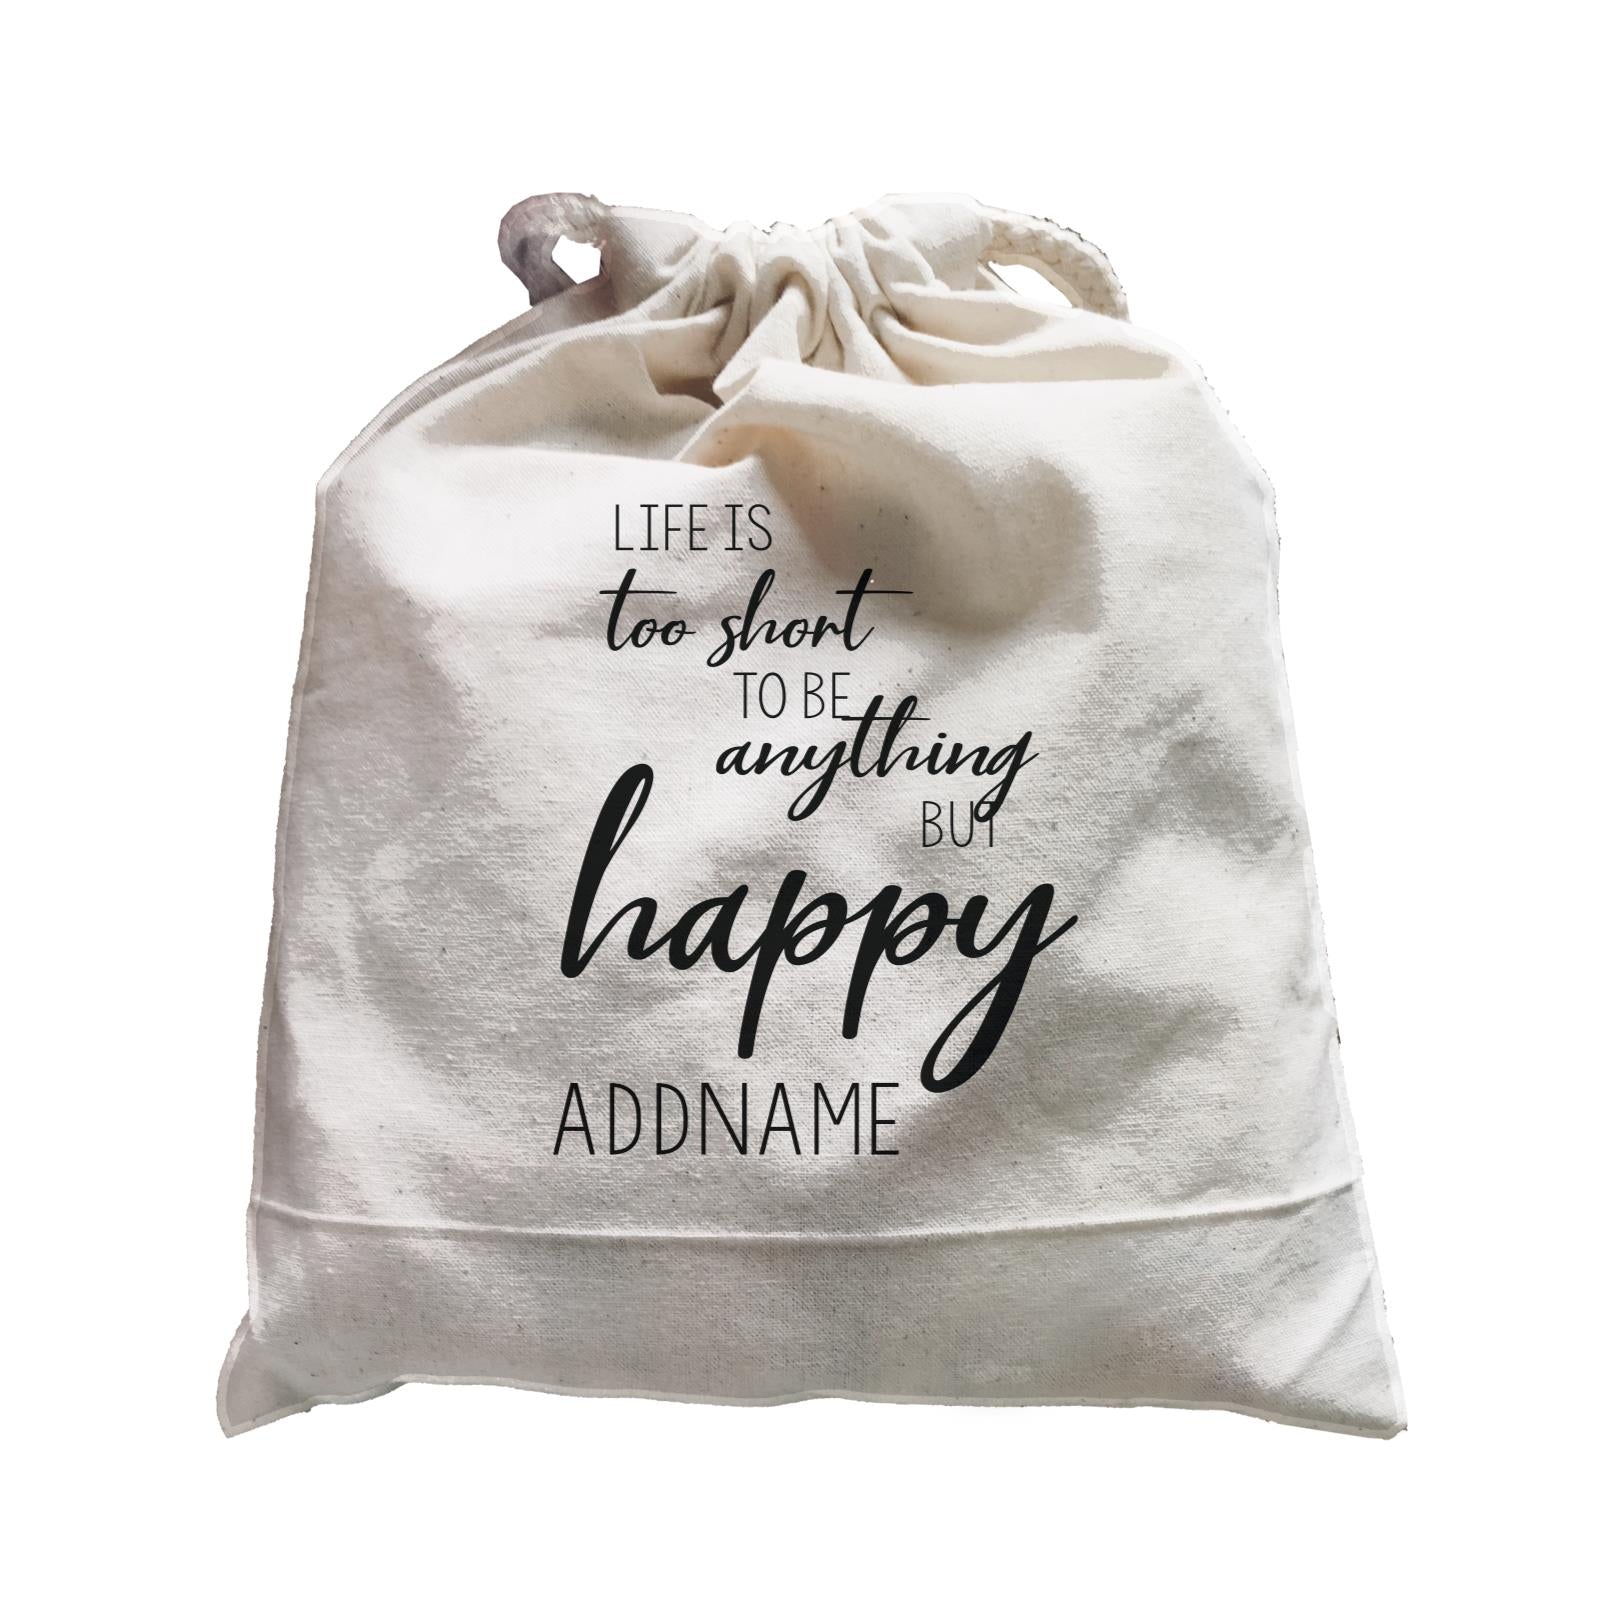 Inspiration Quotes Life Is Too Short To Be Anything But Happy Addname Satchel